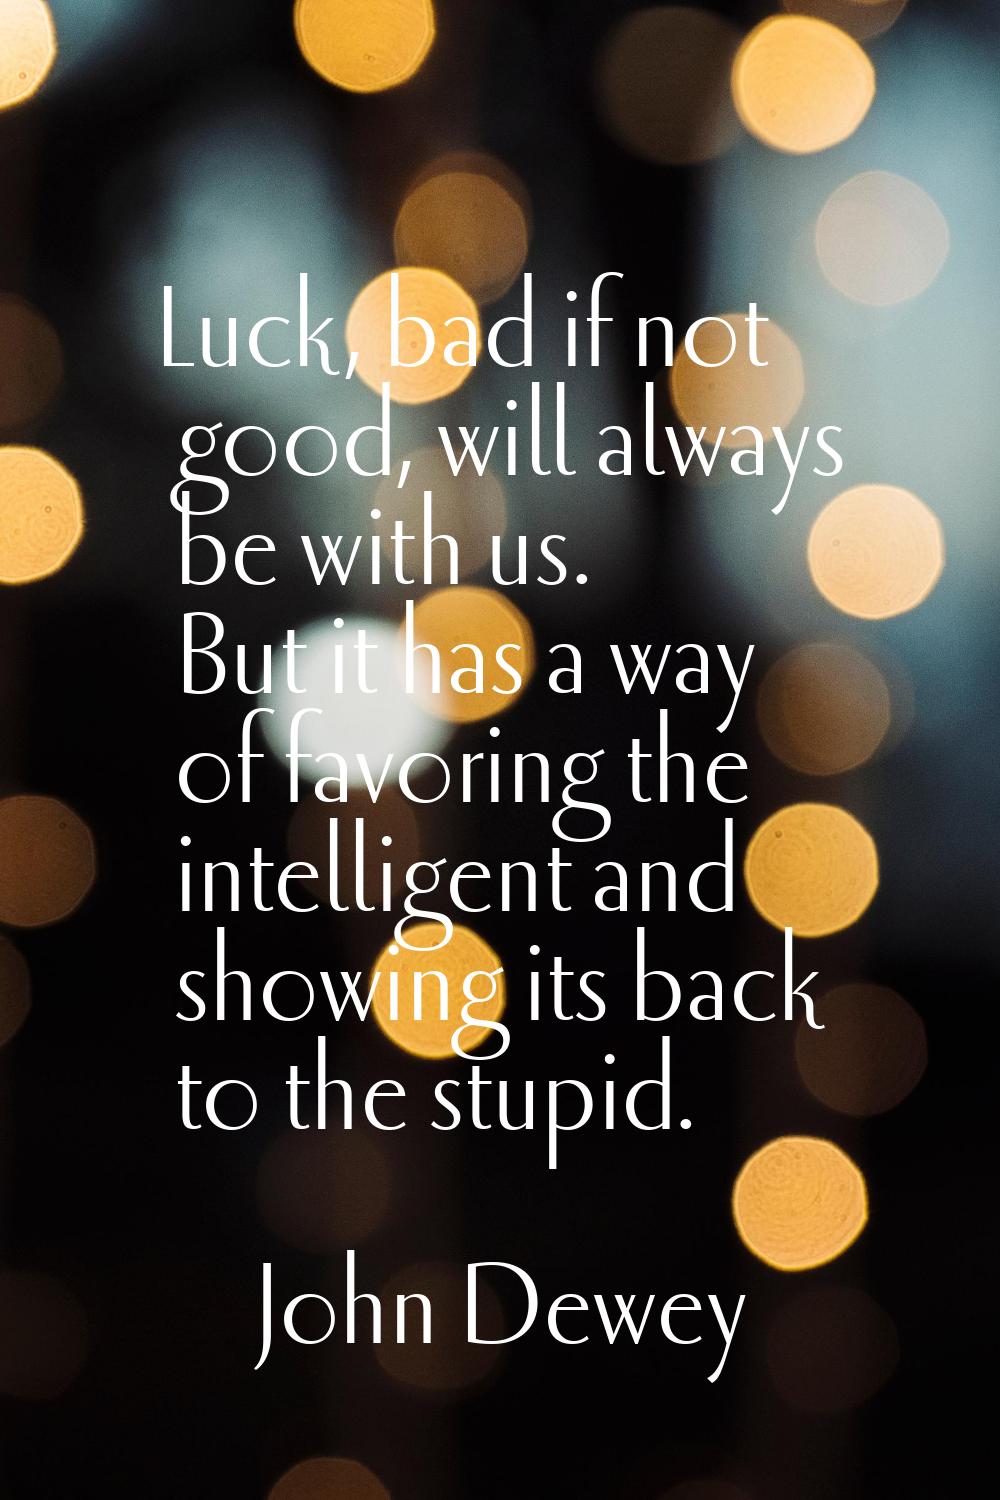 Luck, bad if not good, will always be with us. But it has a way of favoring the intelligent and sho